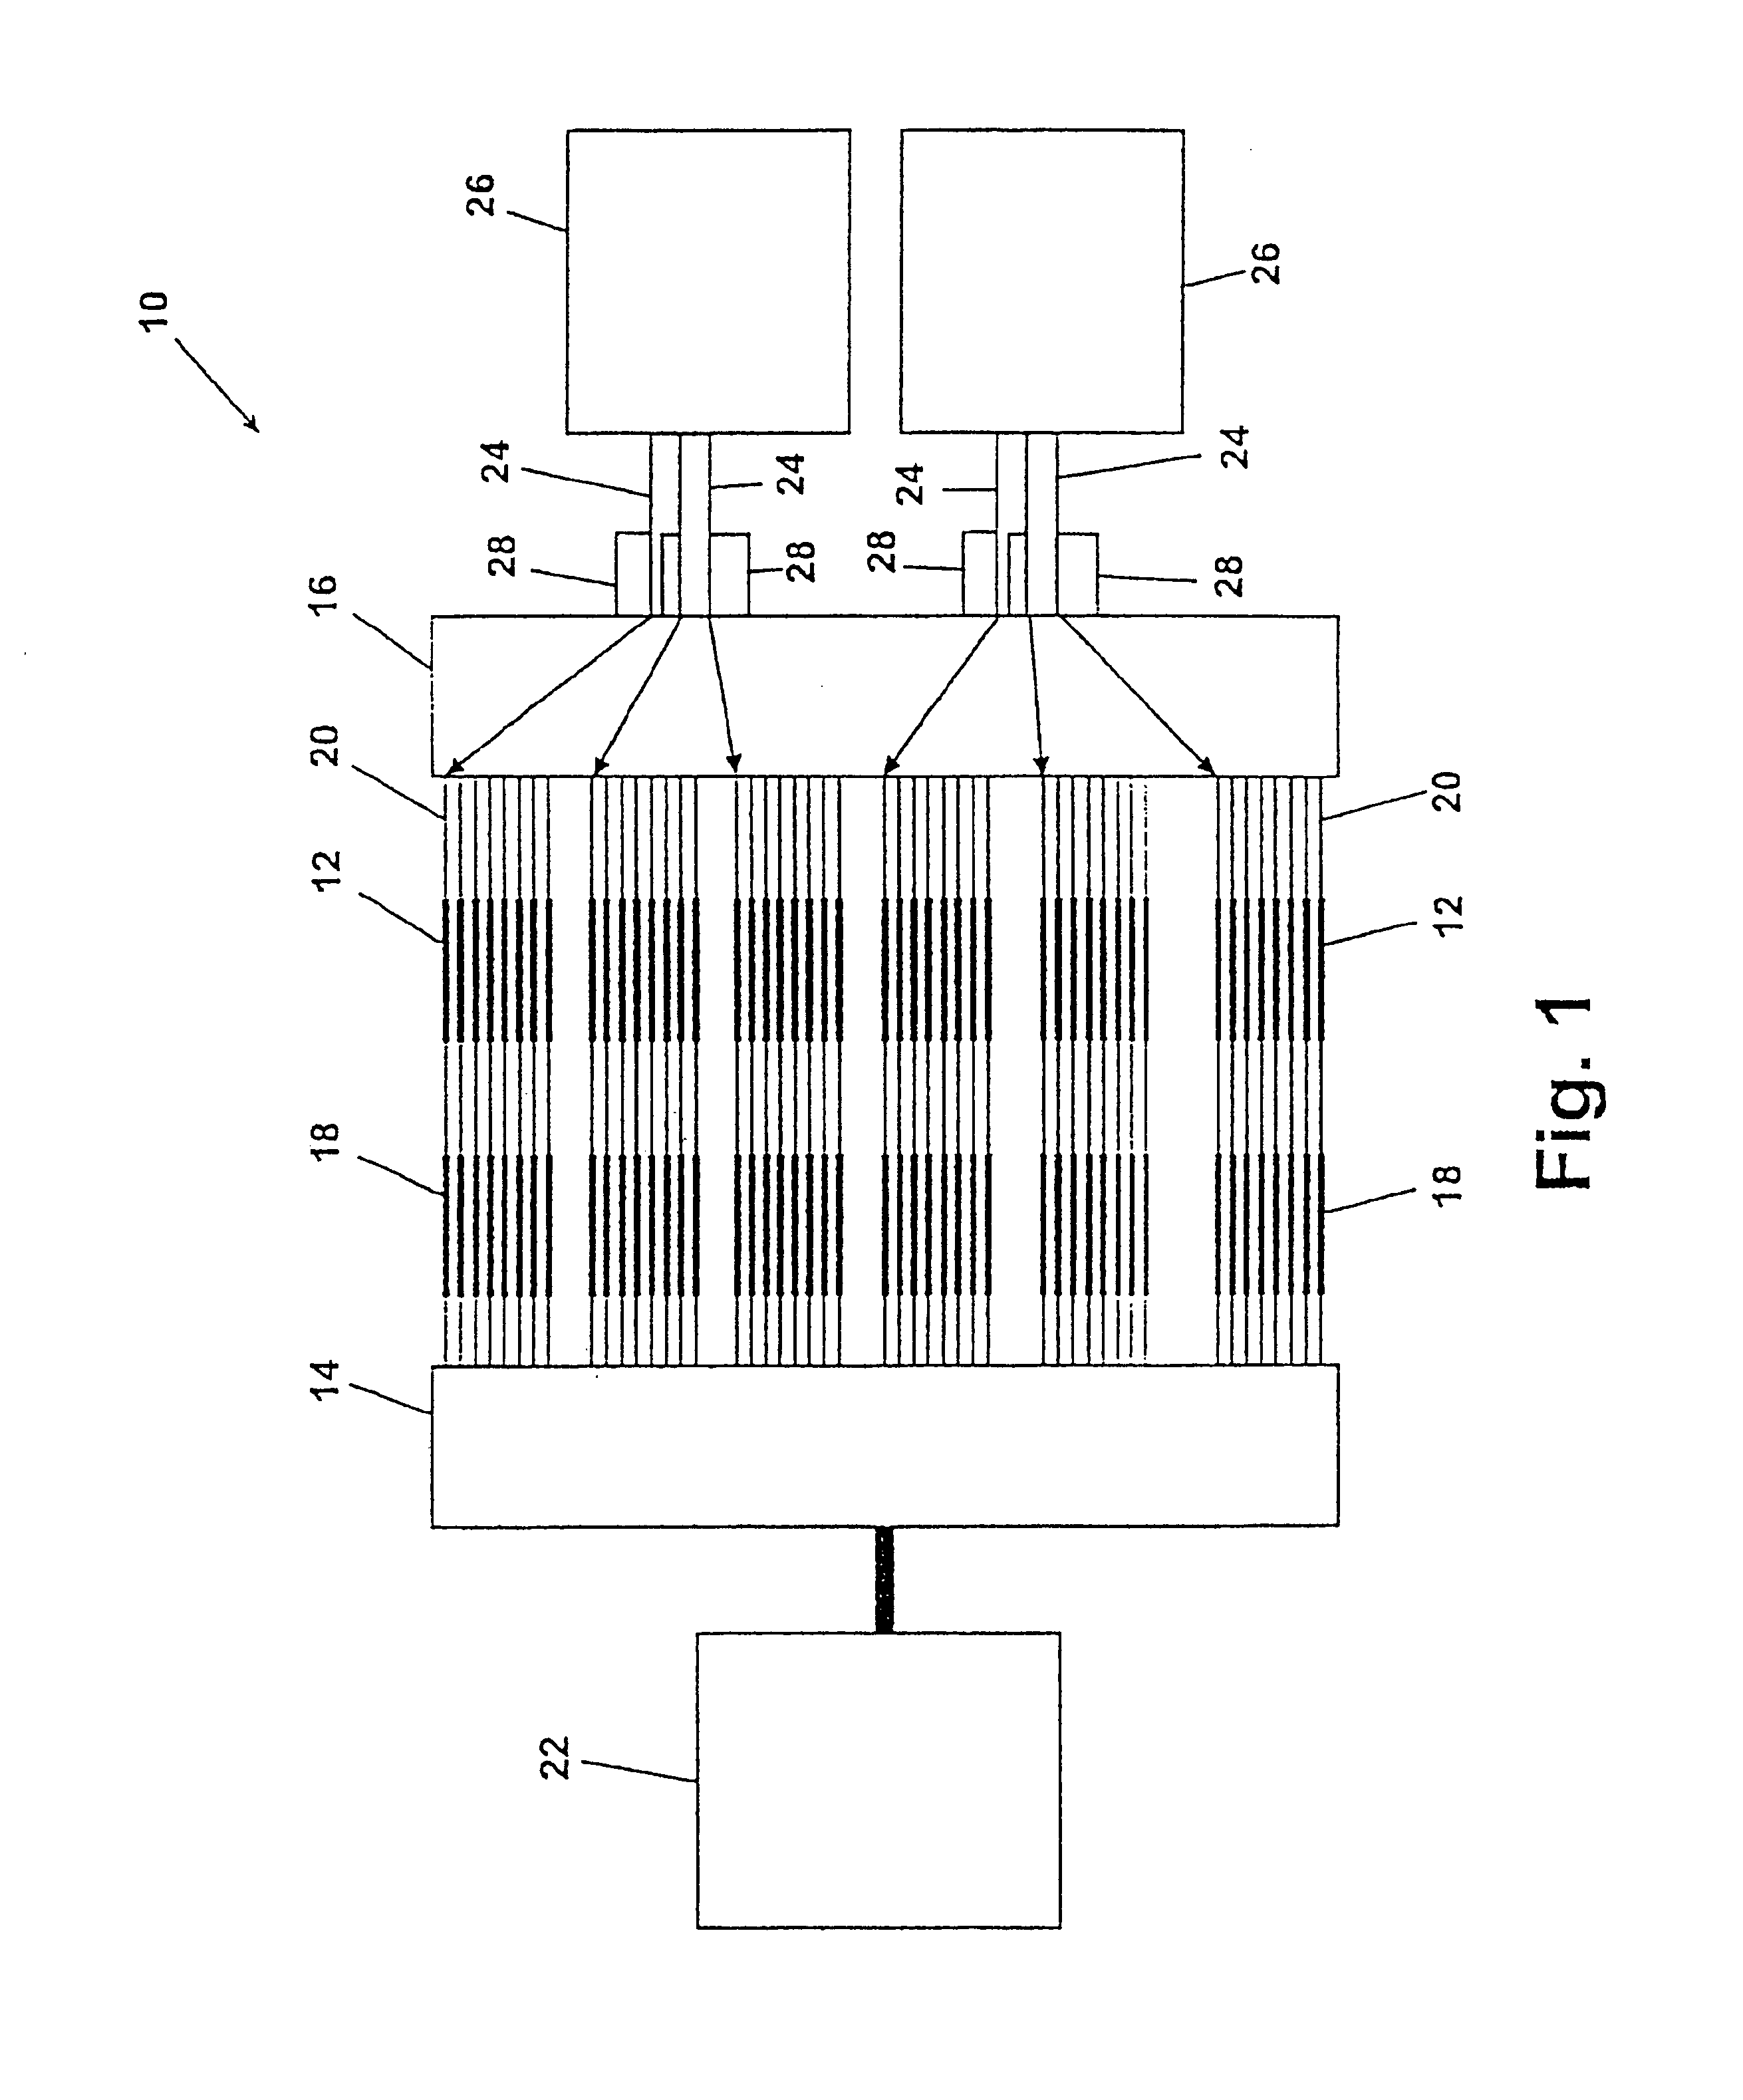 Methods for screening catalysts in a parallel fixed-bed reactor